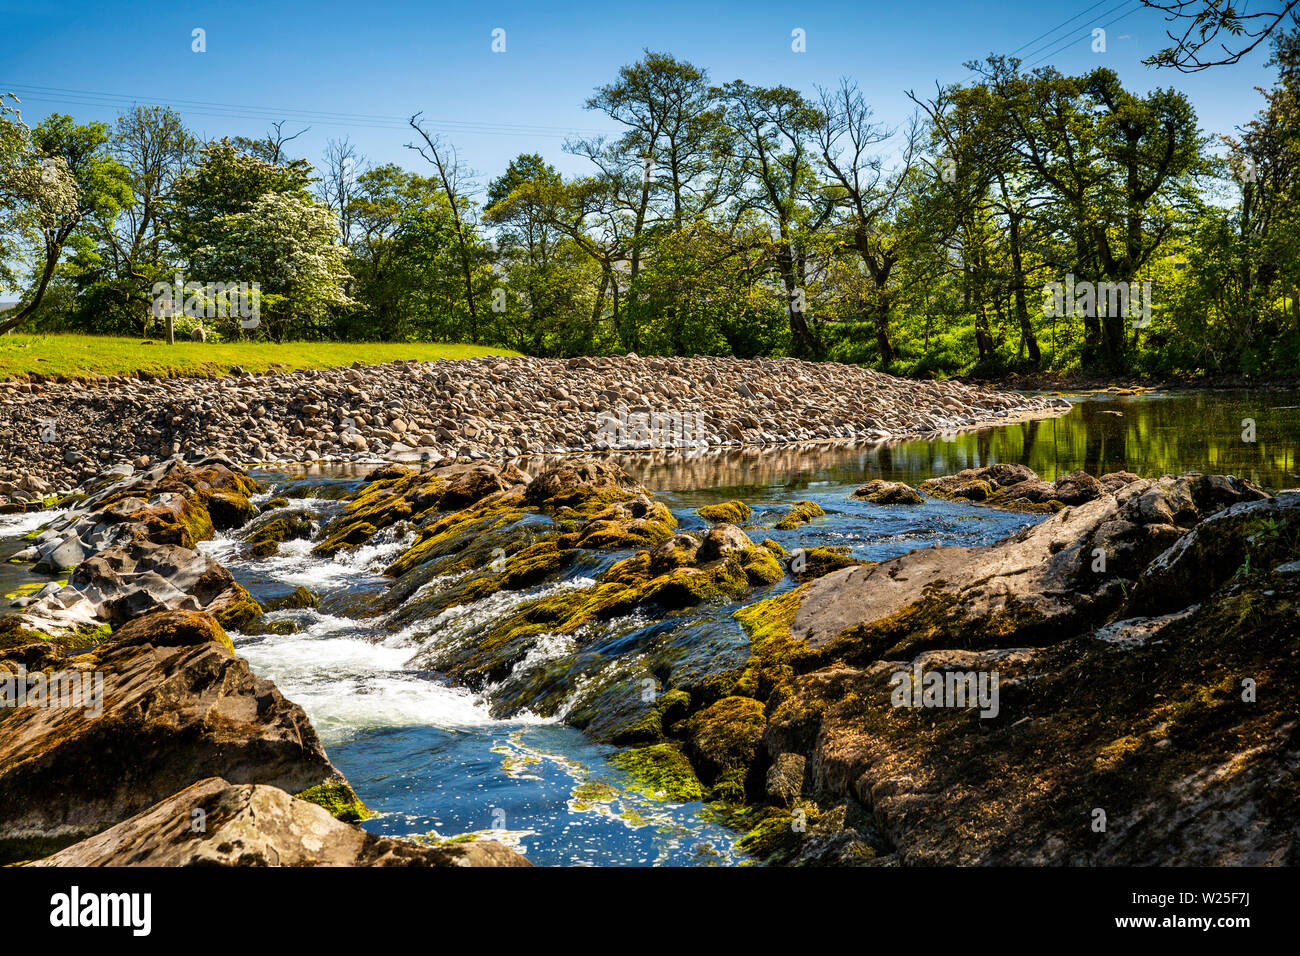 UK, Cumbria, Sedbergh, Millthrop. River Rawthey flowing over bedrock on bend with rocky deposition Stock Photo